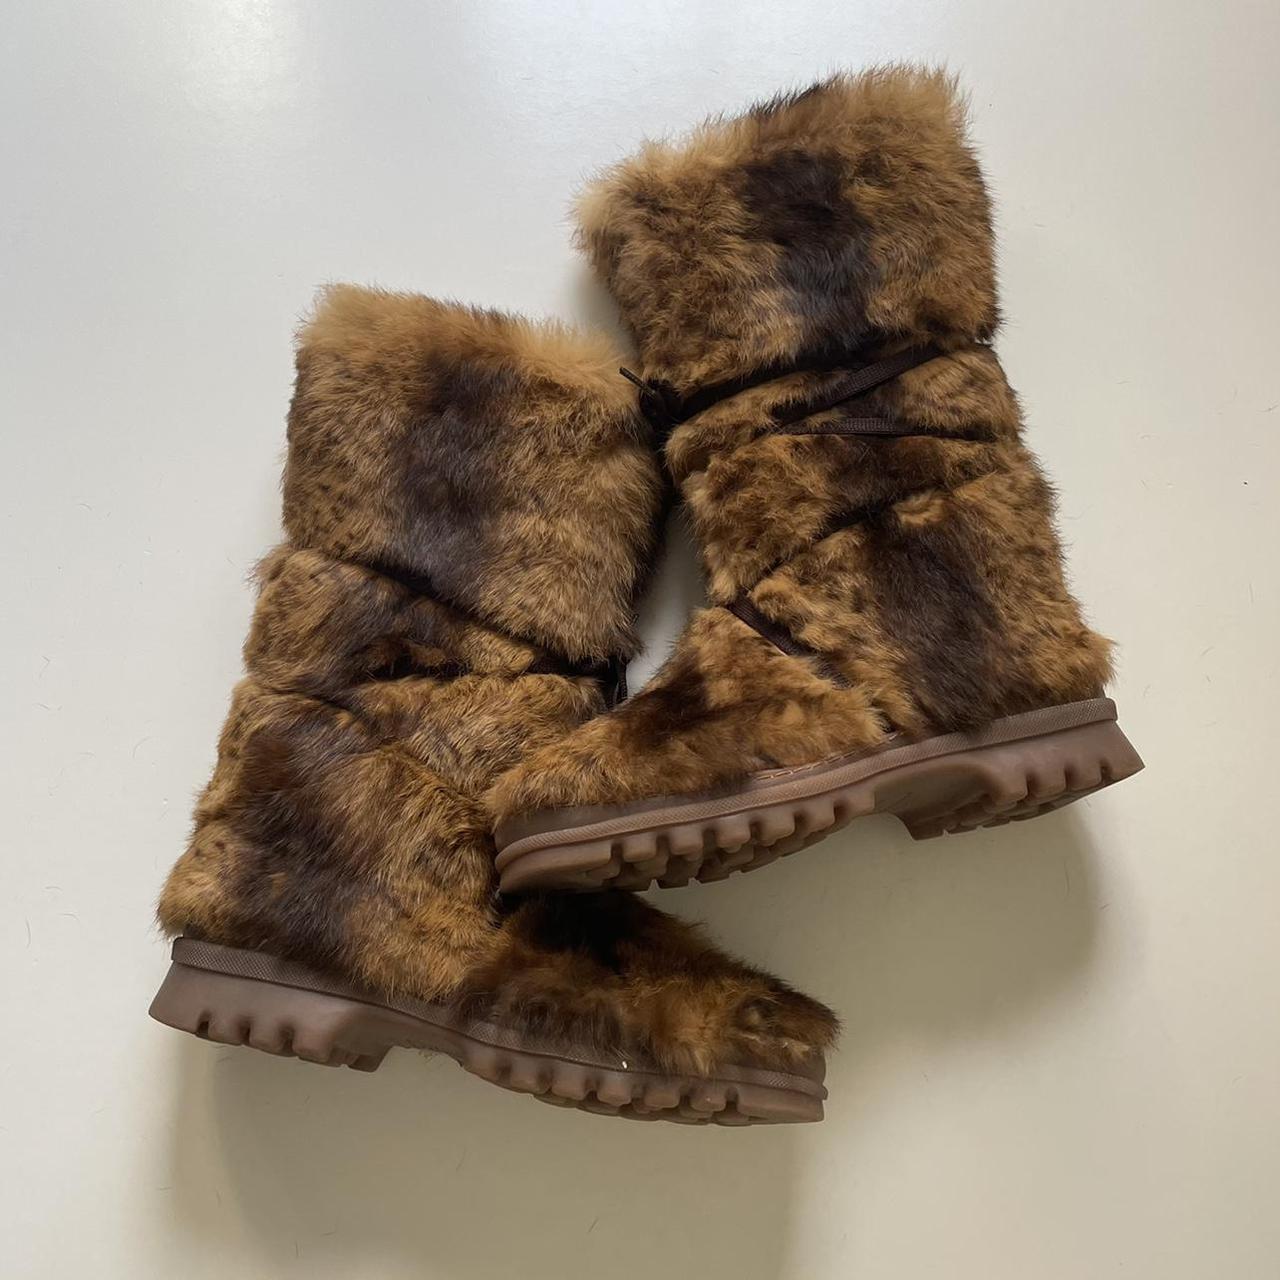 Most insane 00s y2k style fluffy boots, cool tie... - Depop